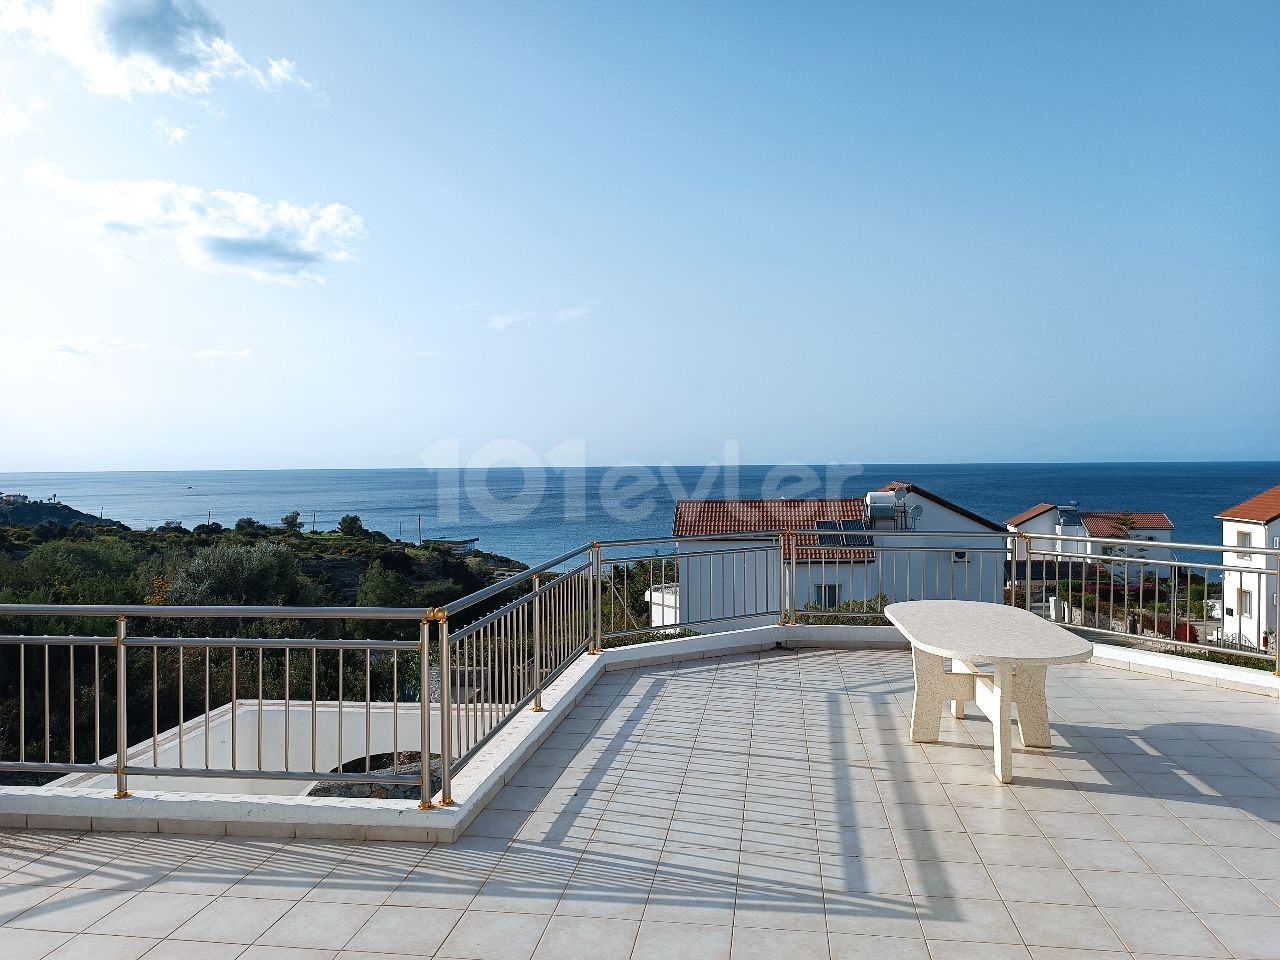 4 Bedroom Villa Fully Furnished With Private Swimming Pool, Large Driveway, And Elevated Sea Views!!